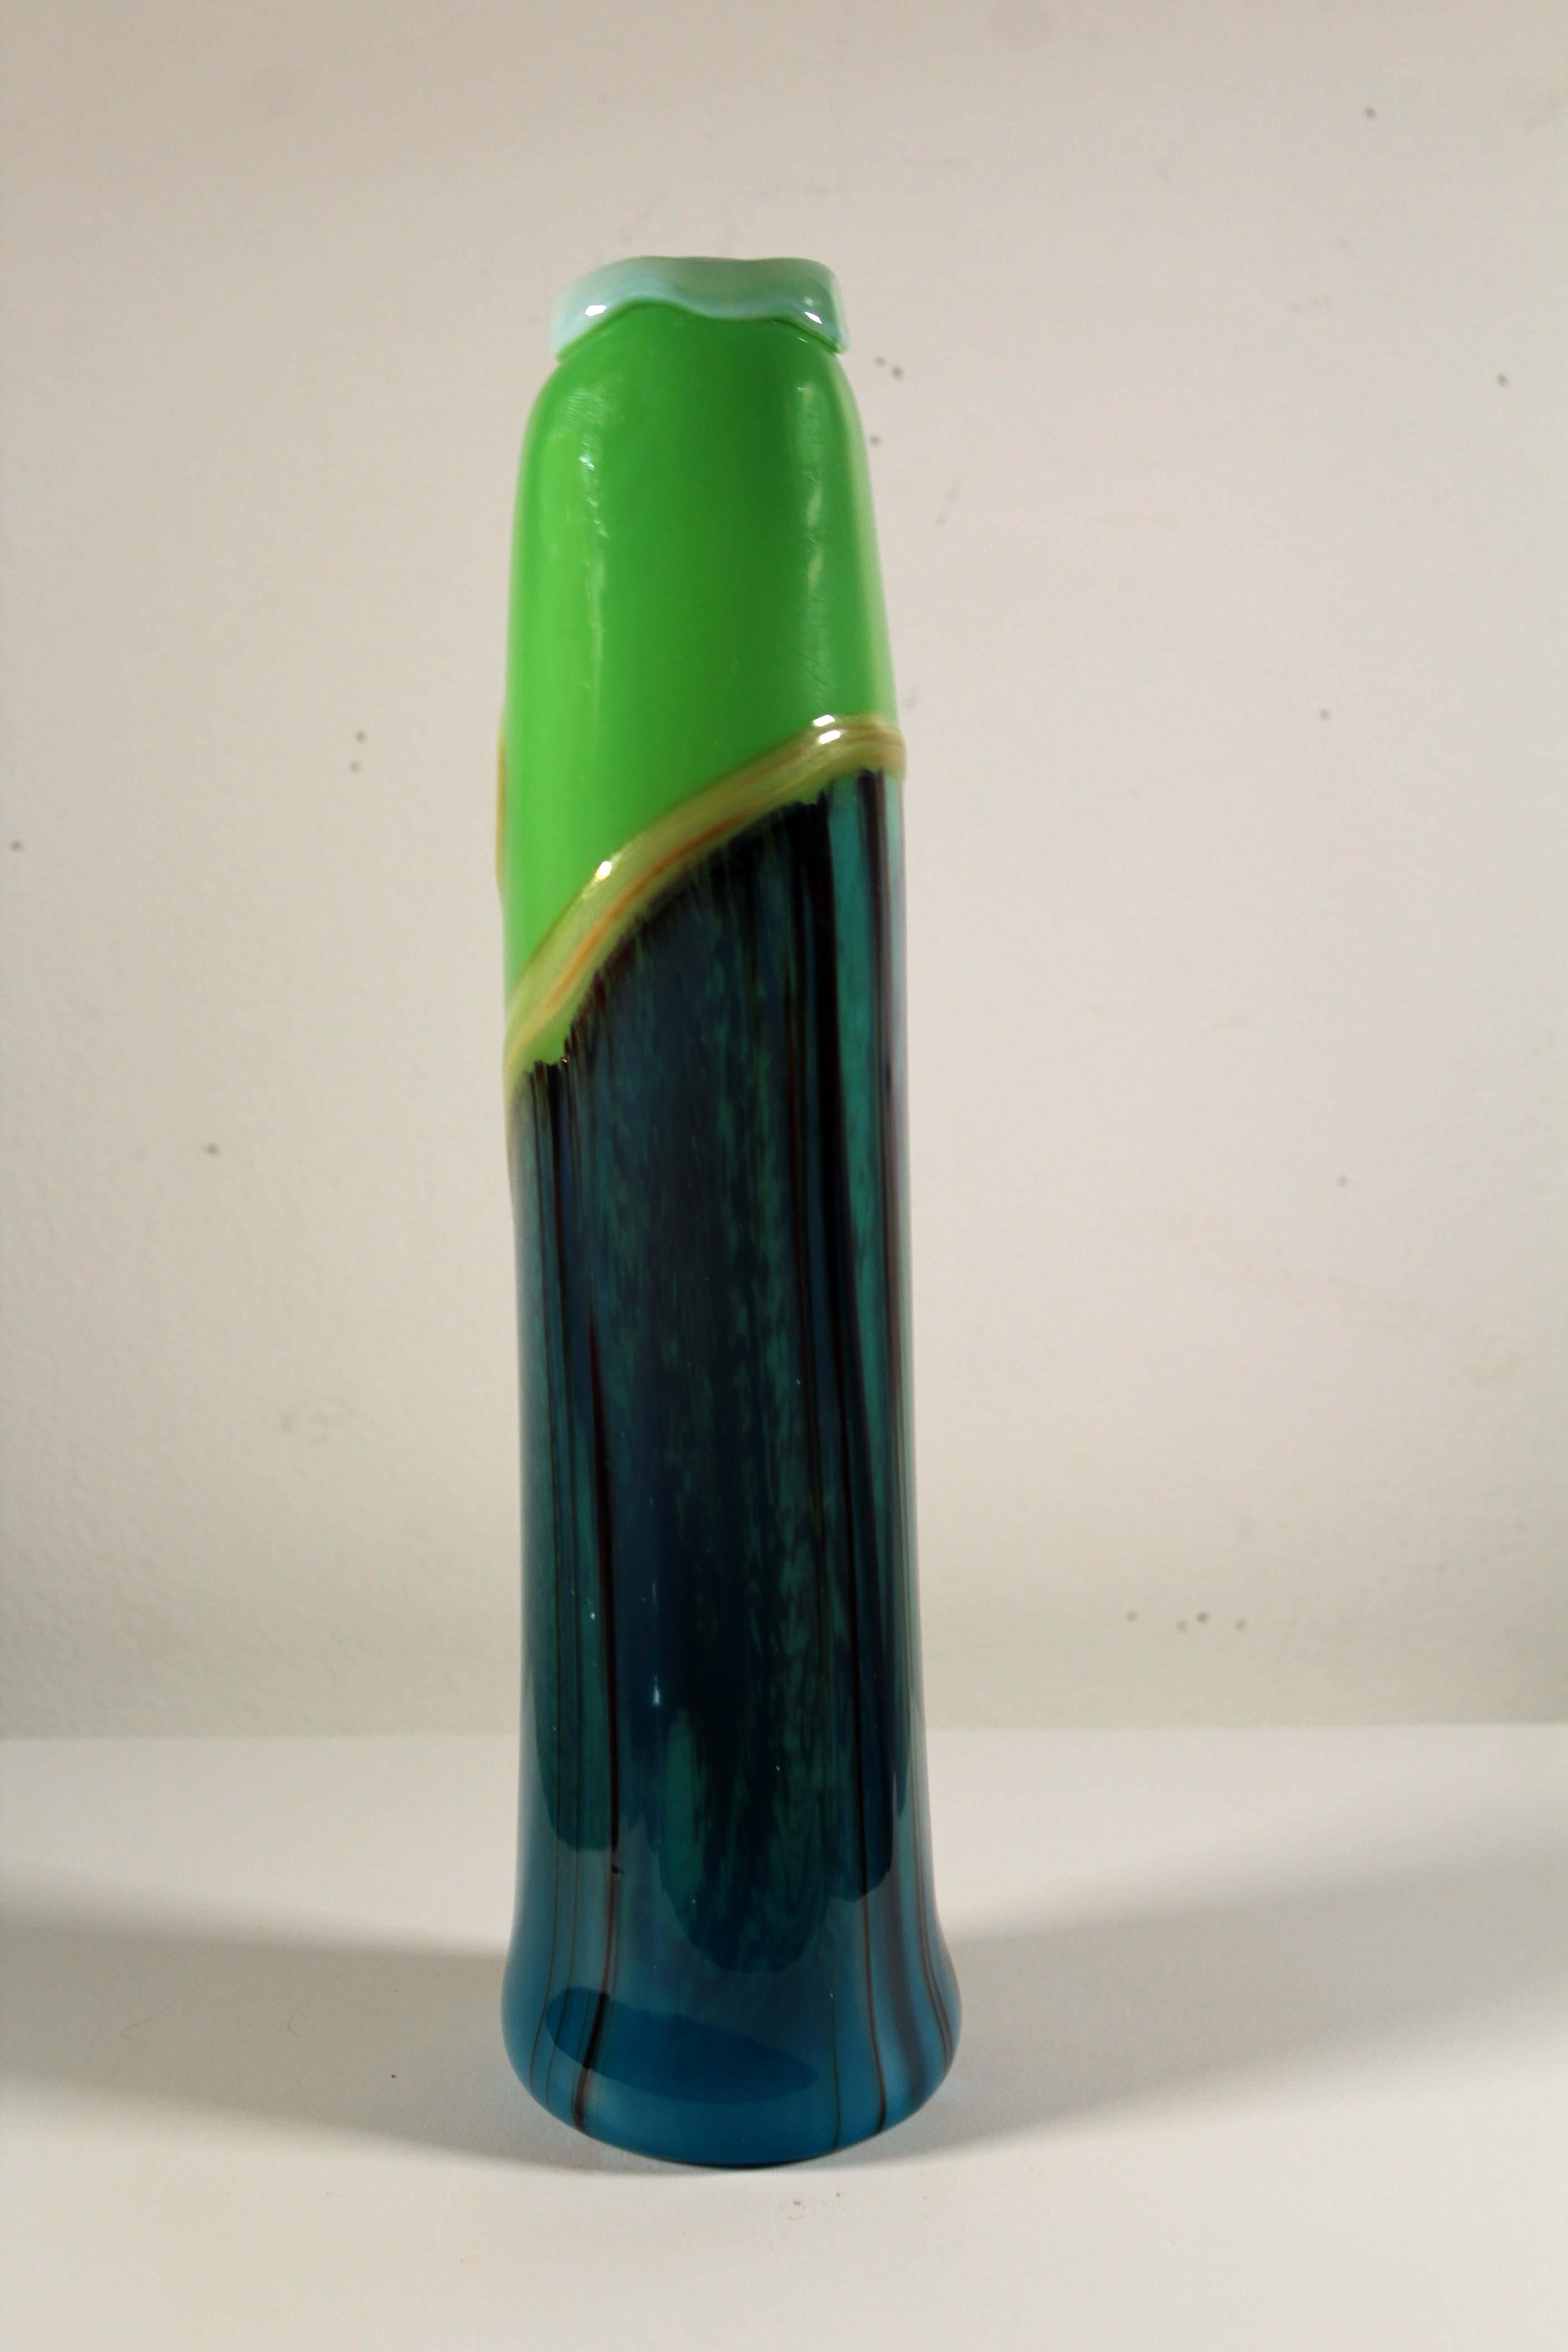 Jack Schmidt Postmodern Studio Handblown Glass Tall Green and Blue Vase, 1975 In Good Condition For Sale In Keego Harbor, MI